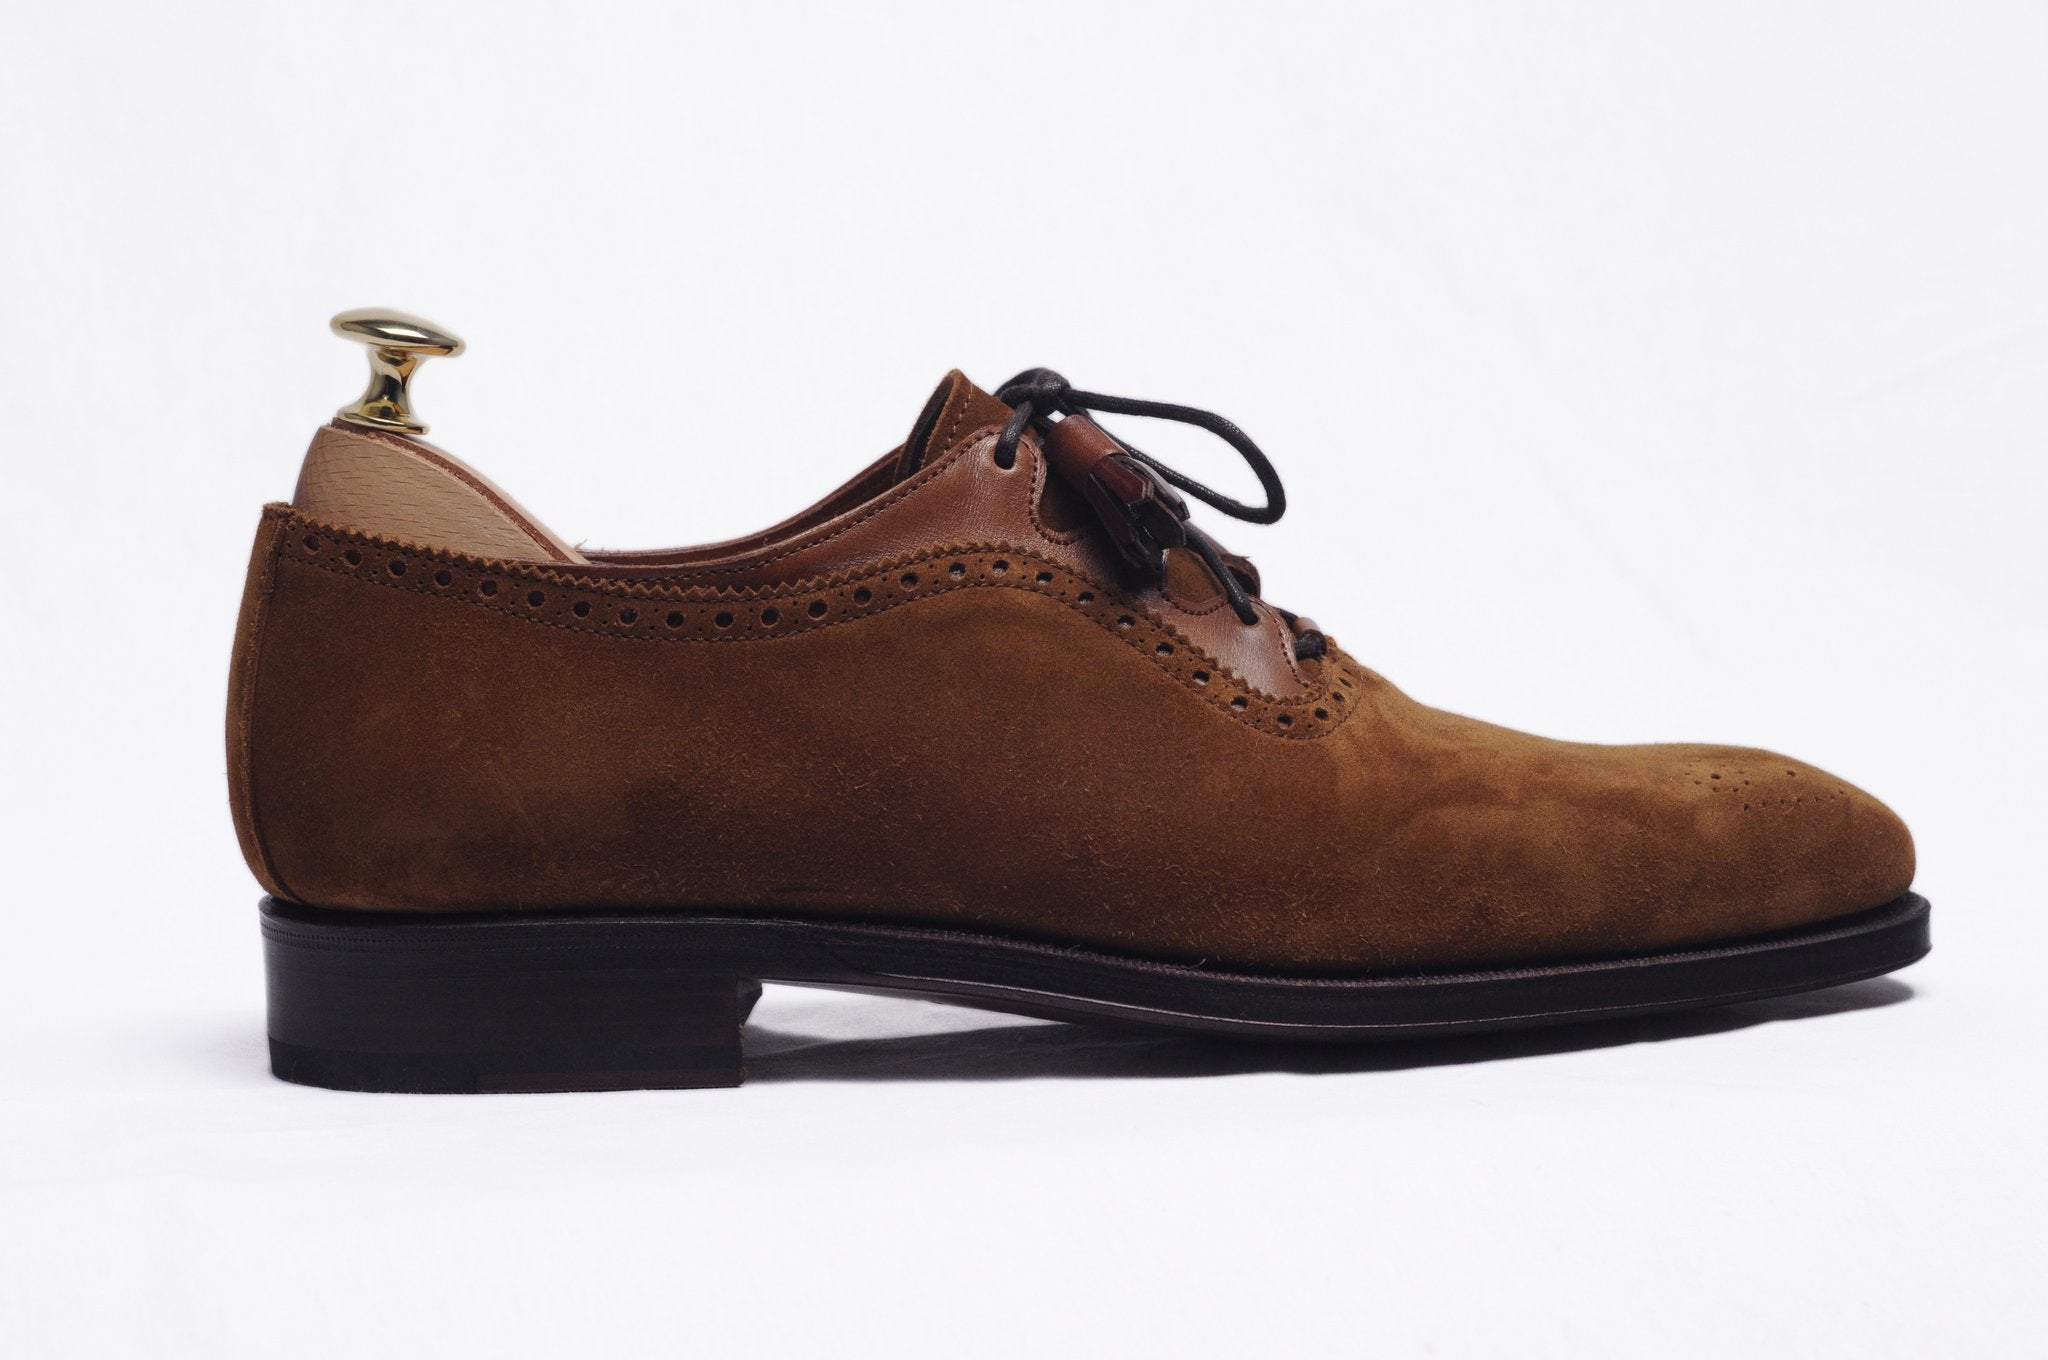 The Shoe Files: Ghillie Brogues